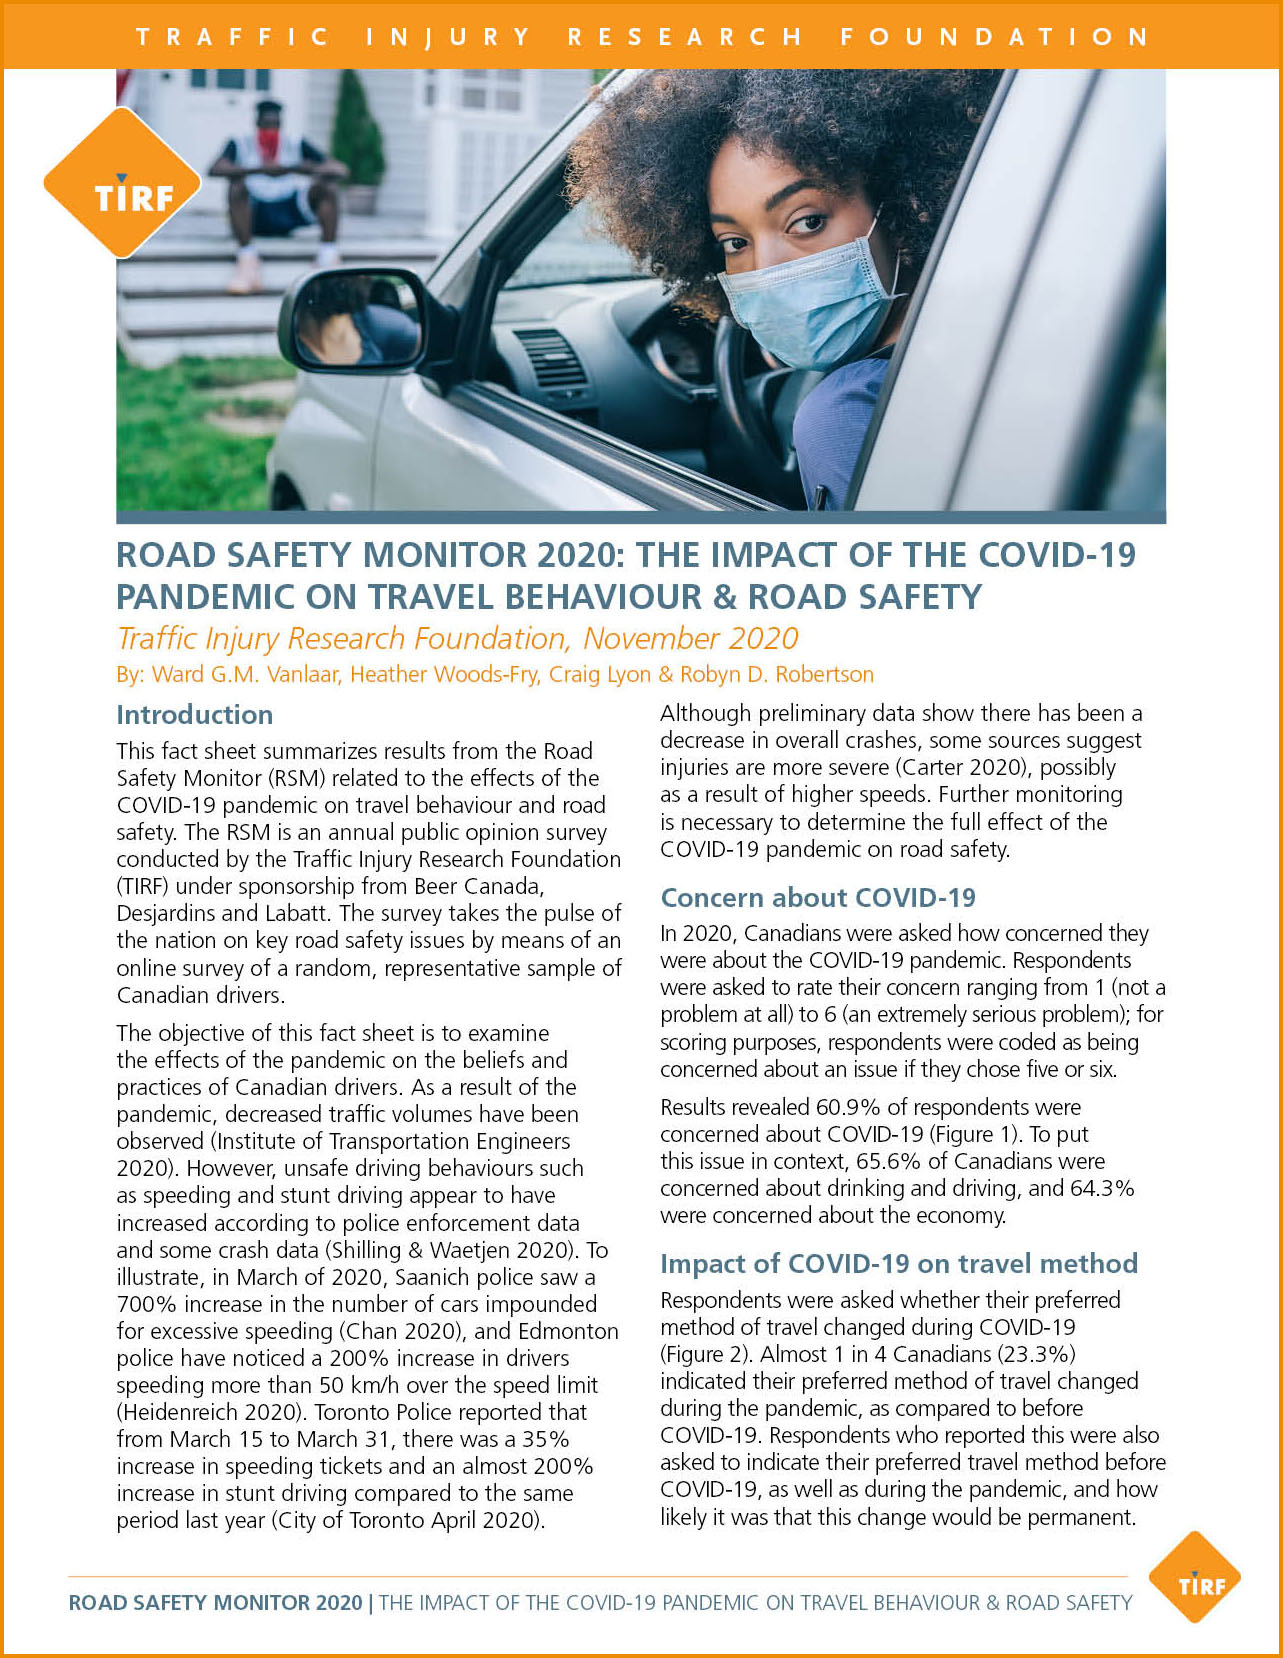 Road Safety Monitor 2020: The Impact of the COVID-19 Pandemic on Travel Behaviour & Road Safety